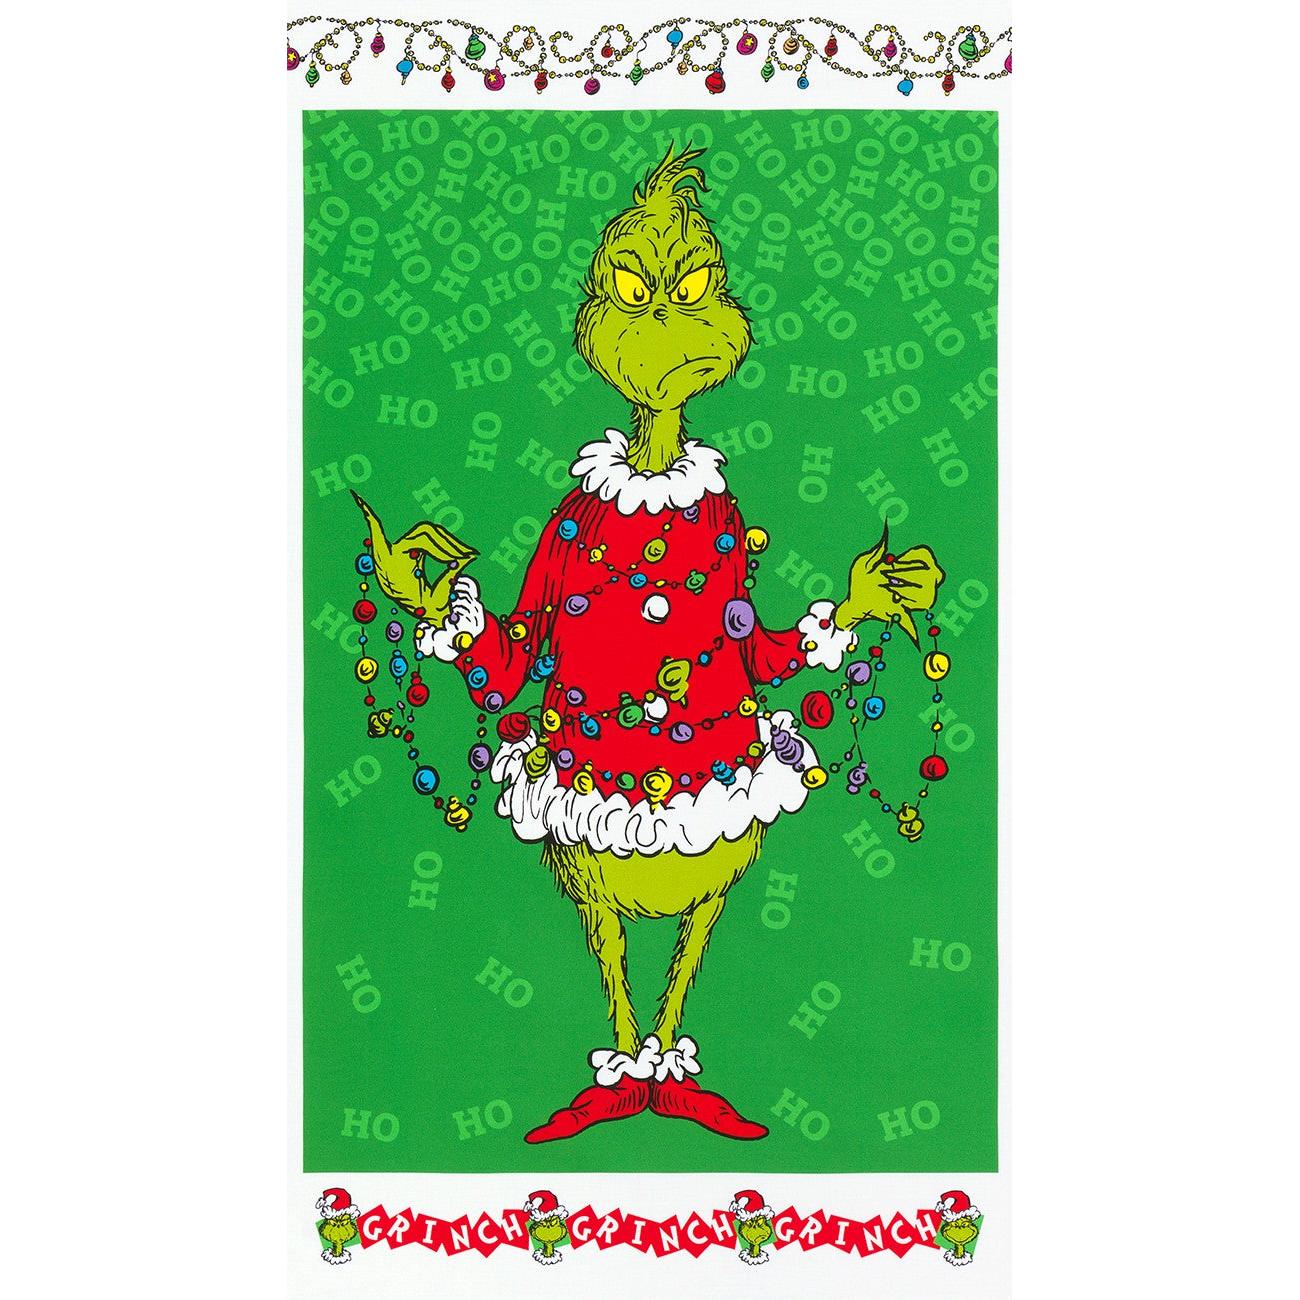 How the Grinch Stole Christmas Green Grinch Panel 24"x 44/45"